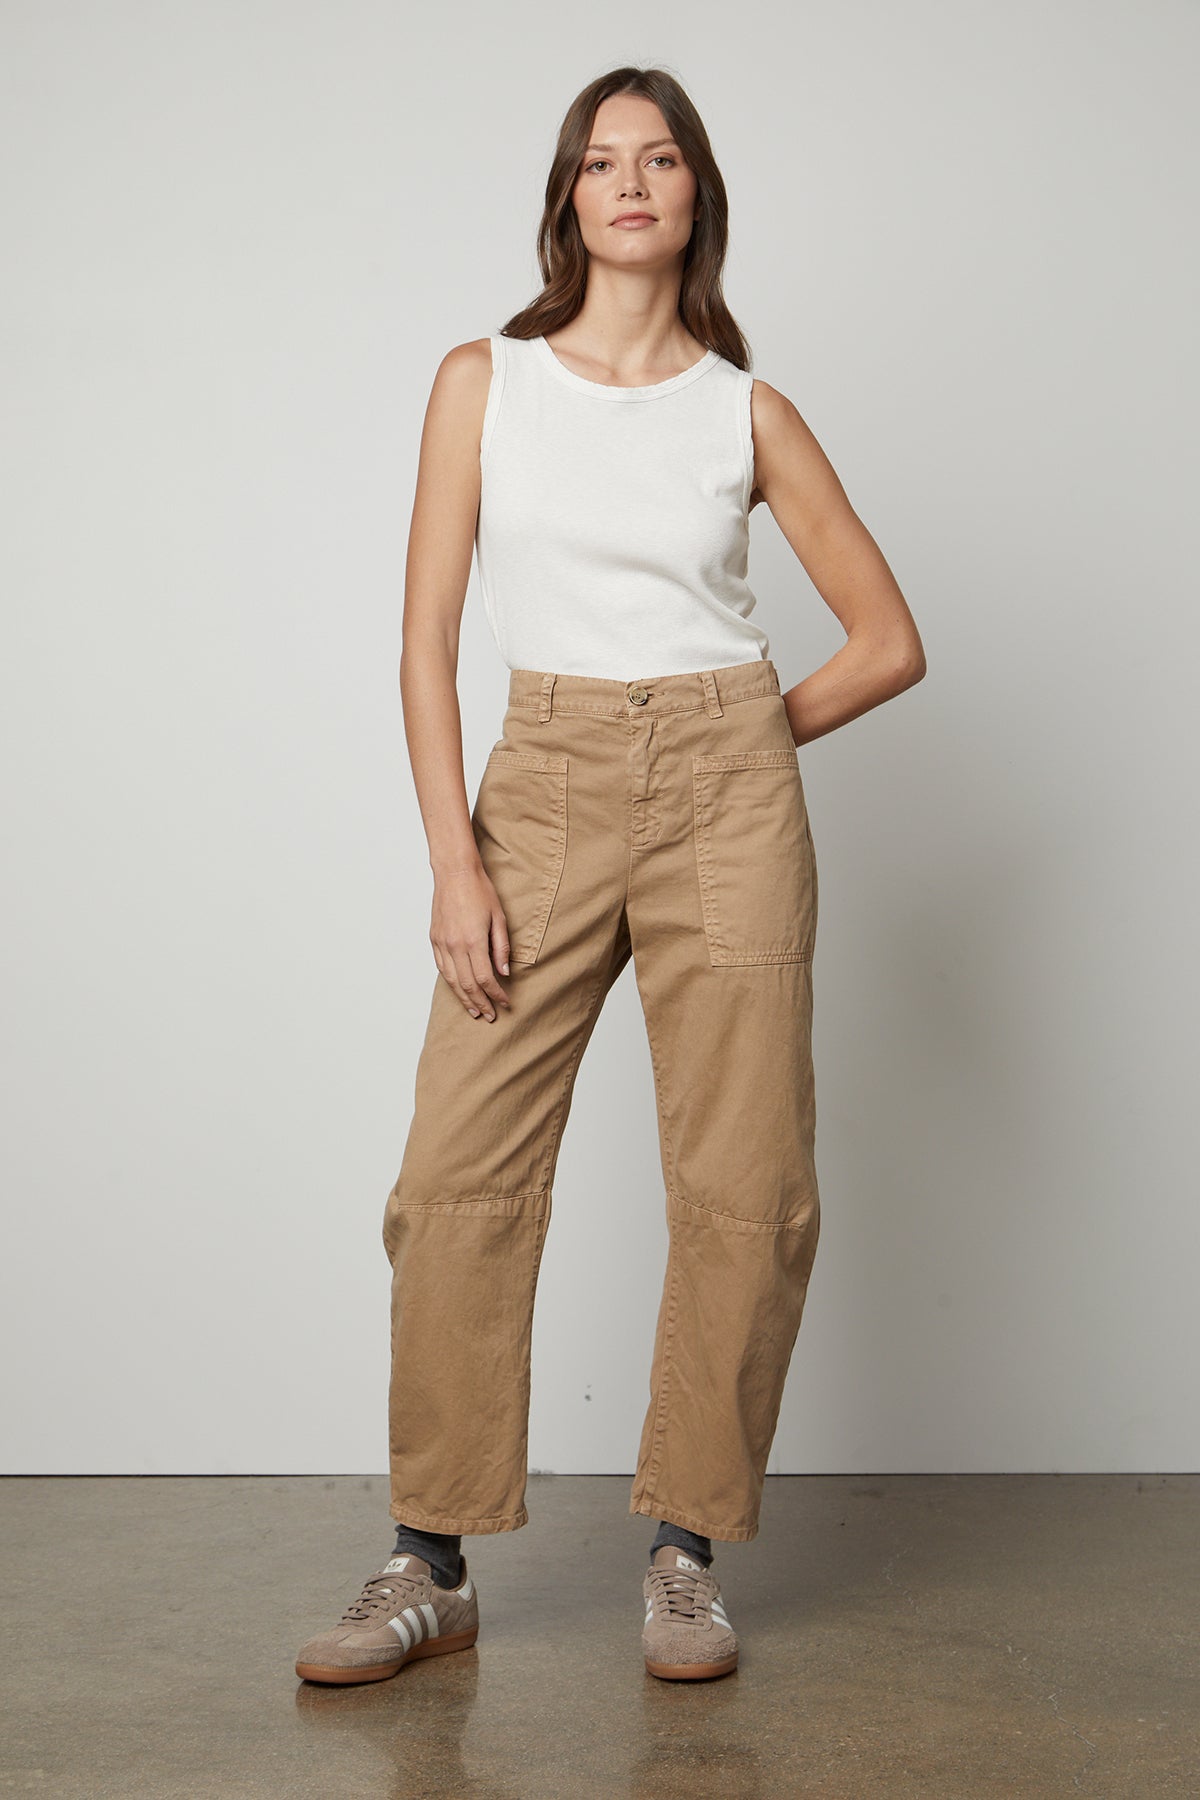   The model is wearing a white top and Velvet by Graham & Spencer's BRYLIE SANDED TWILL UTILITY PANT. 